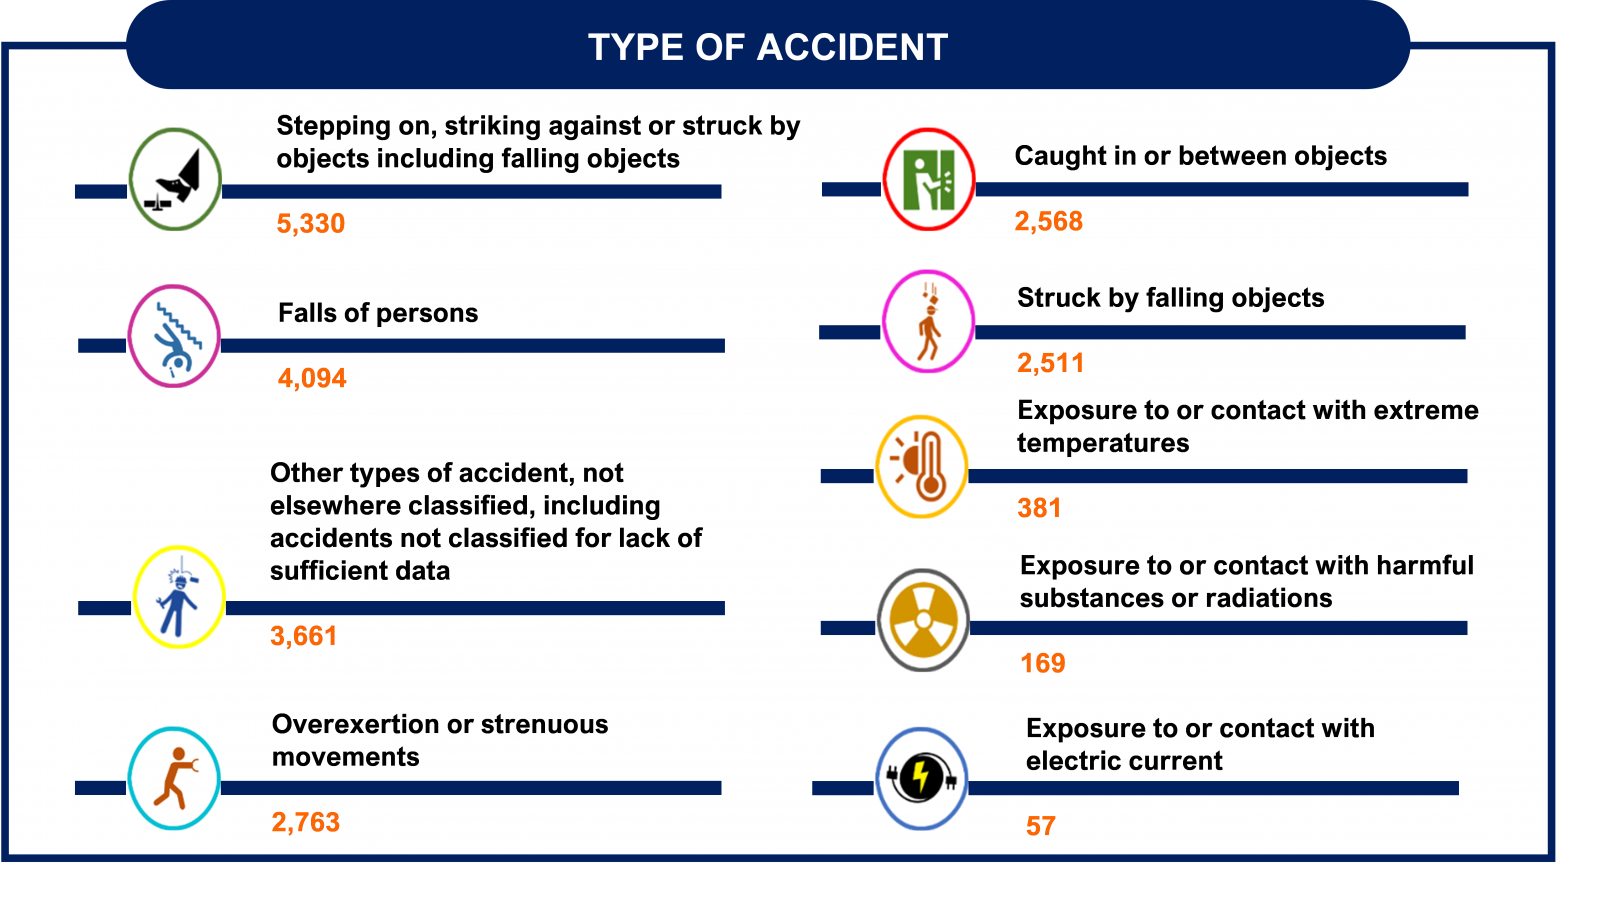 types of accidents-DOSM